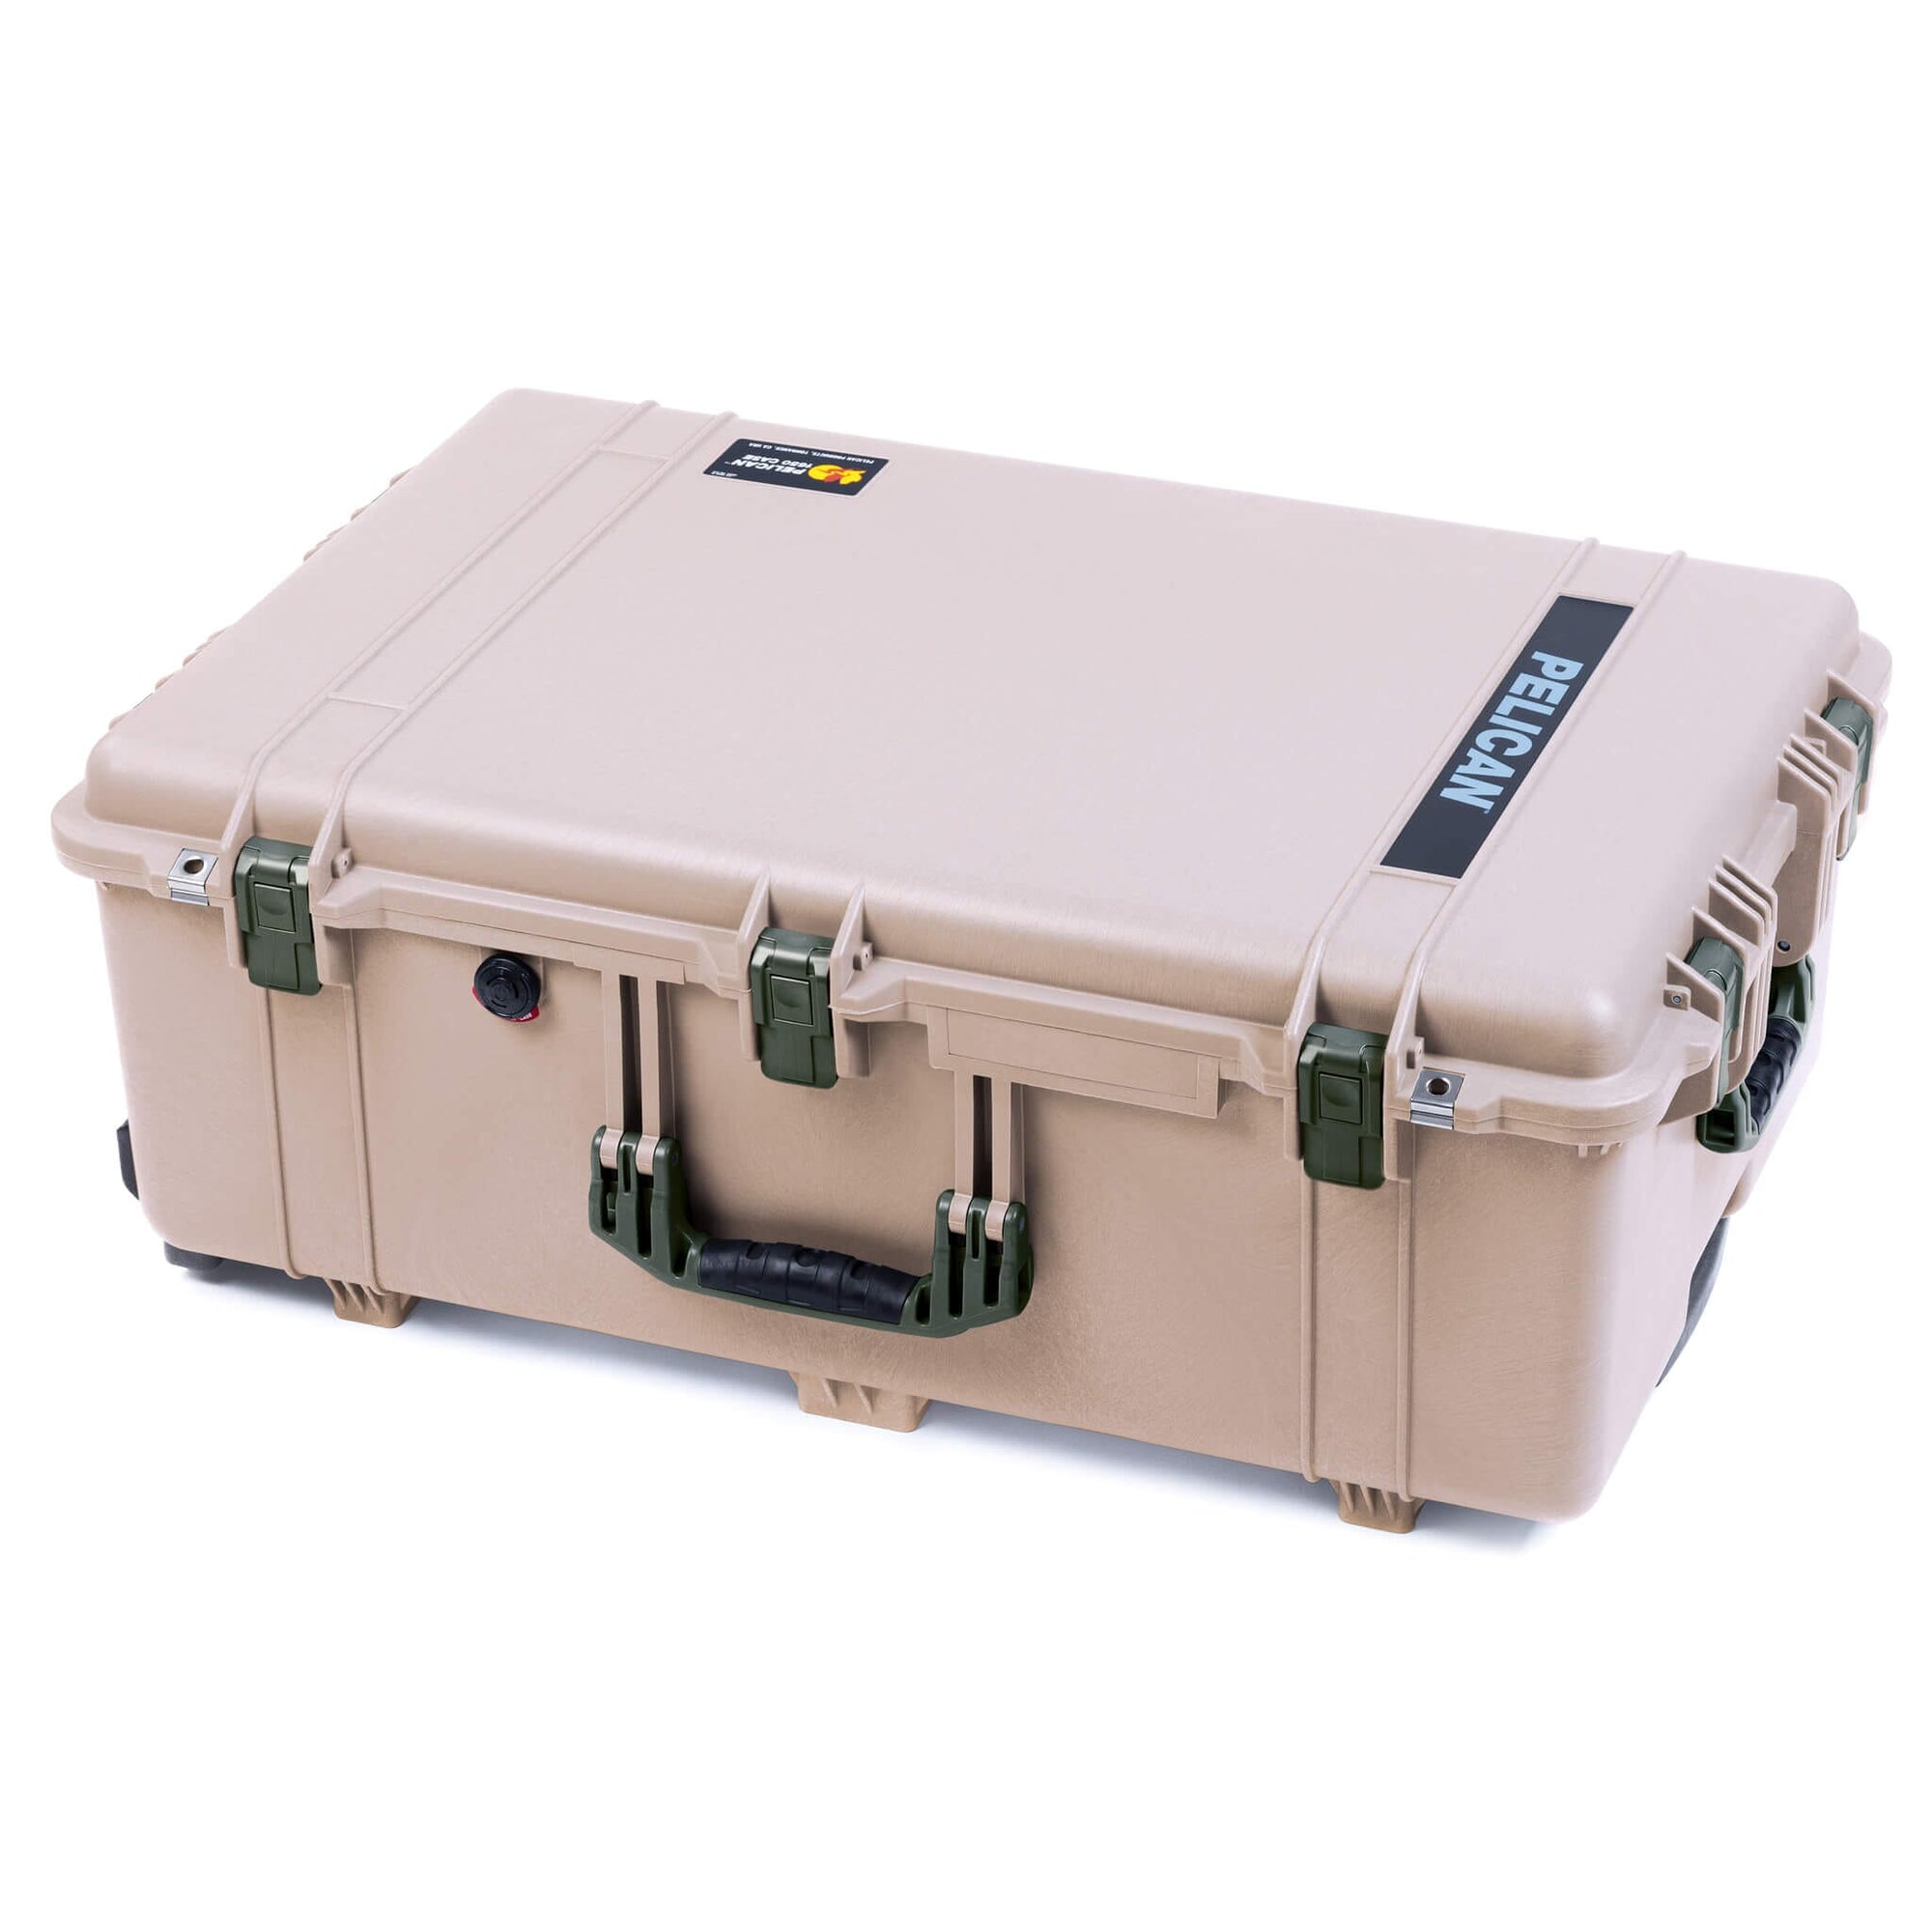 Pelican 1650 Case, Desert Tan with OD Green Handles & Push-Button Latches ColorCase 